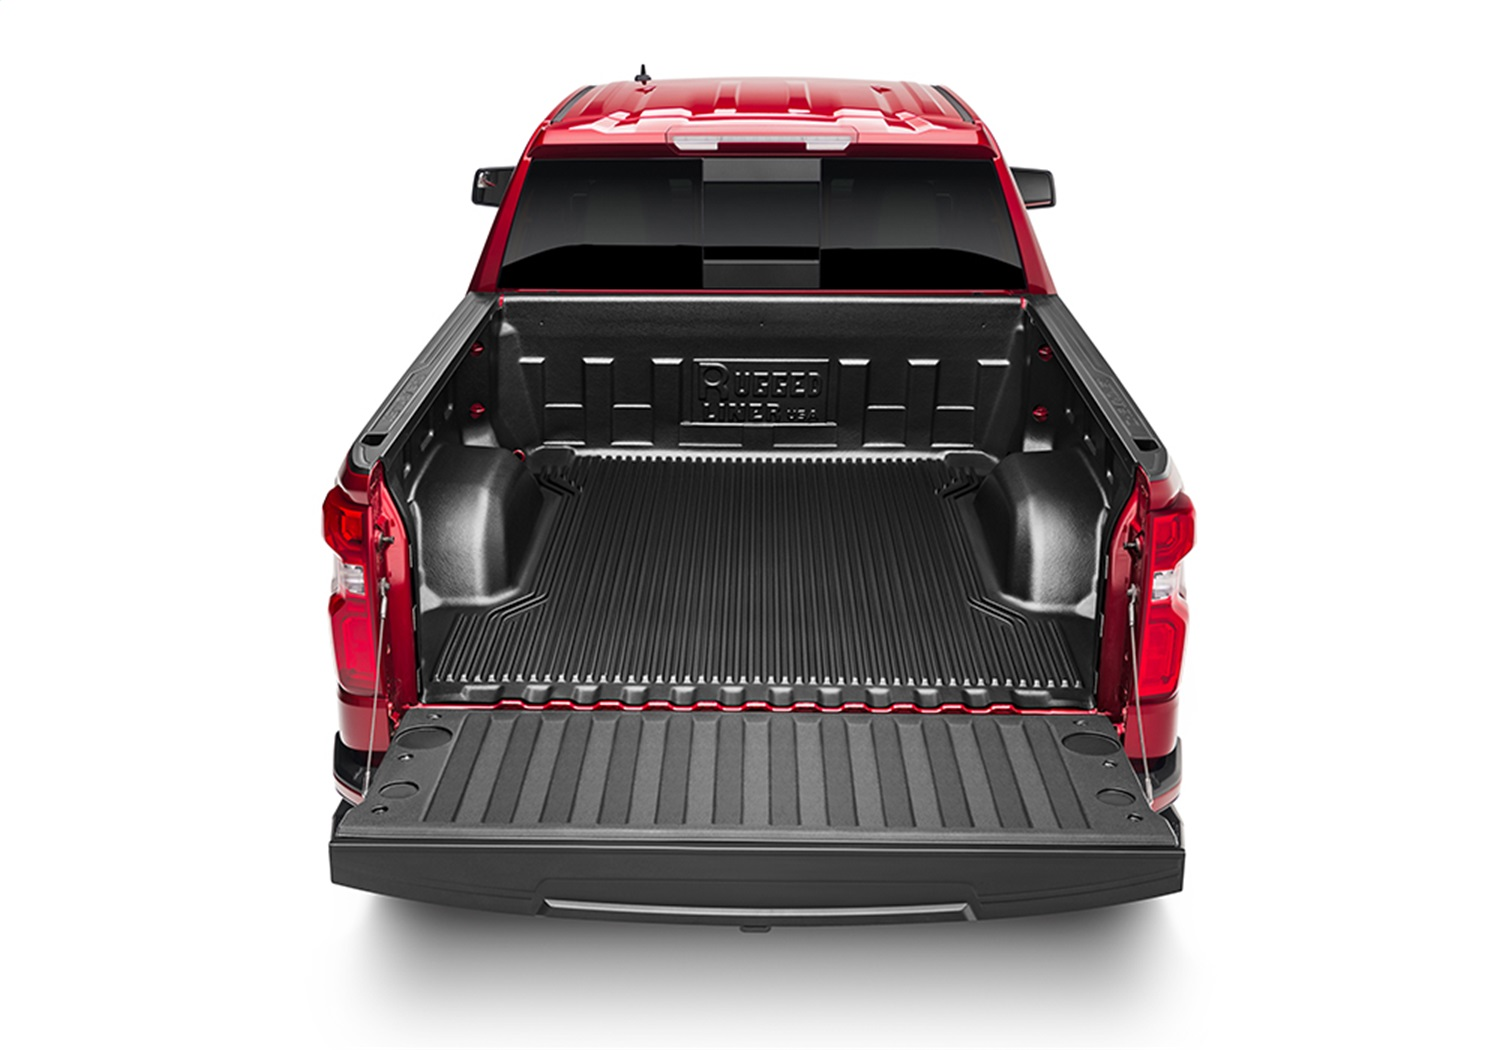 Rugged Liner DRB57U19 - Rugged Liner Under Rail Bed Liner Dodge Ram 2019 5'7" Box with RamBox